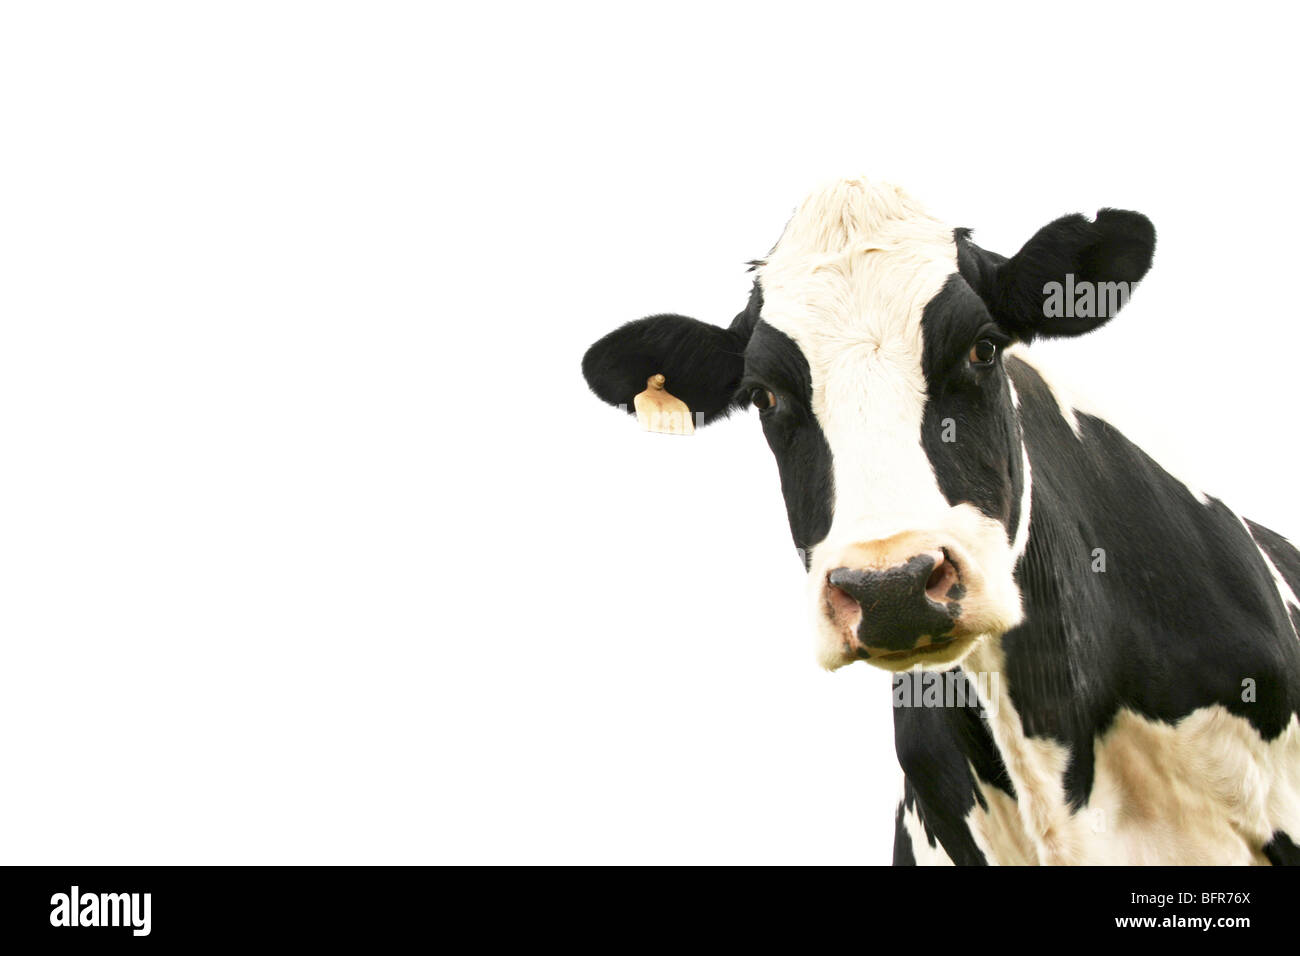 Friesland cow portrait against a white background Stock Photo